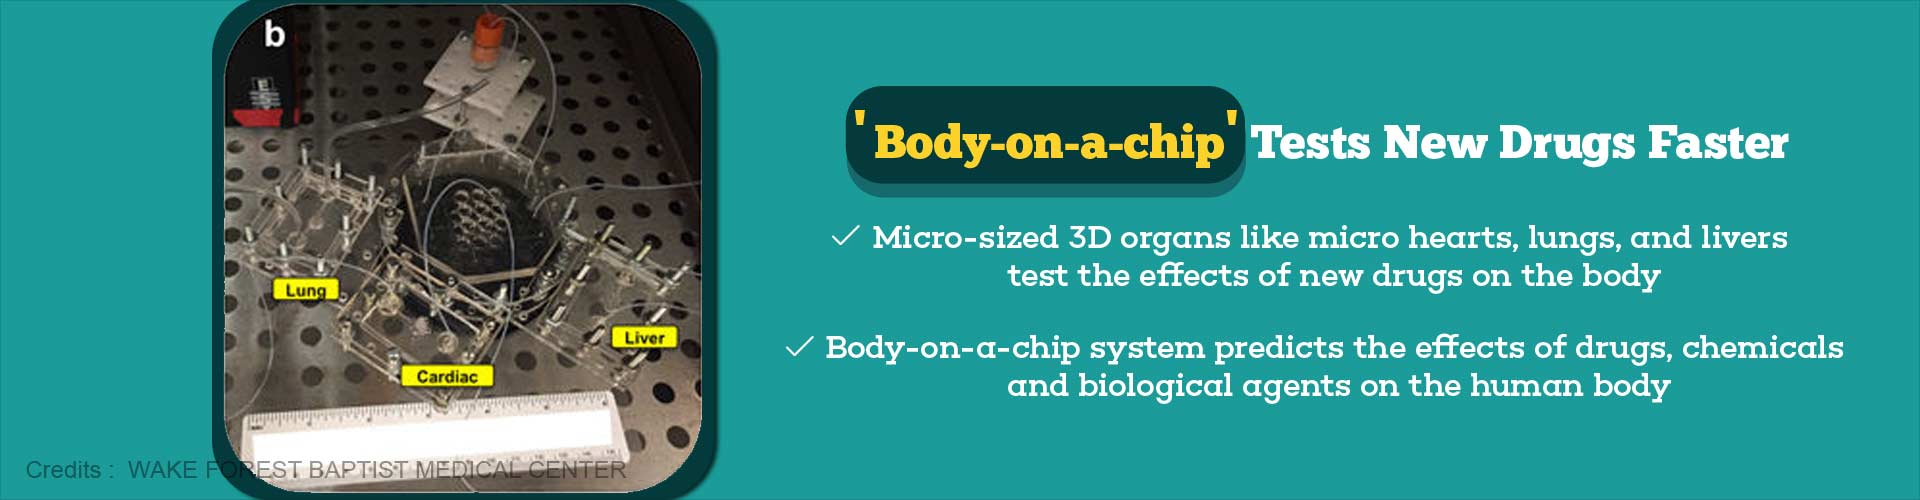 body-on-chip tests new drugs faster
- Micro-sized 3D organs like micro hearts, lungs, and livers test the effects of new drugs on the body
- body-on-chip system predicts the effects of drugs, chemicals and biological agents on the human body